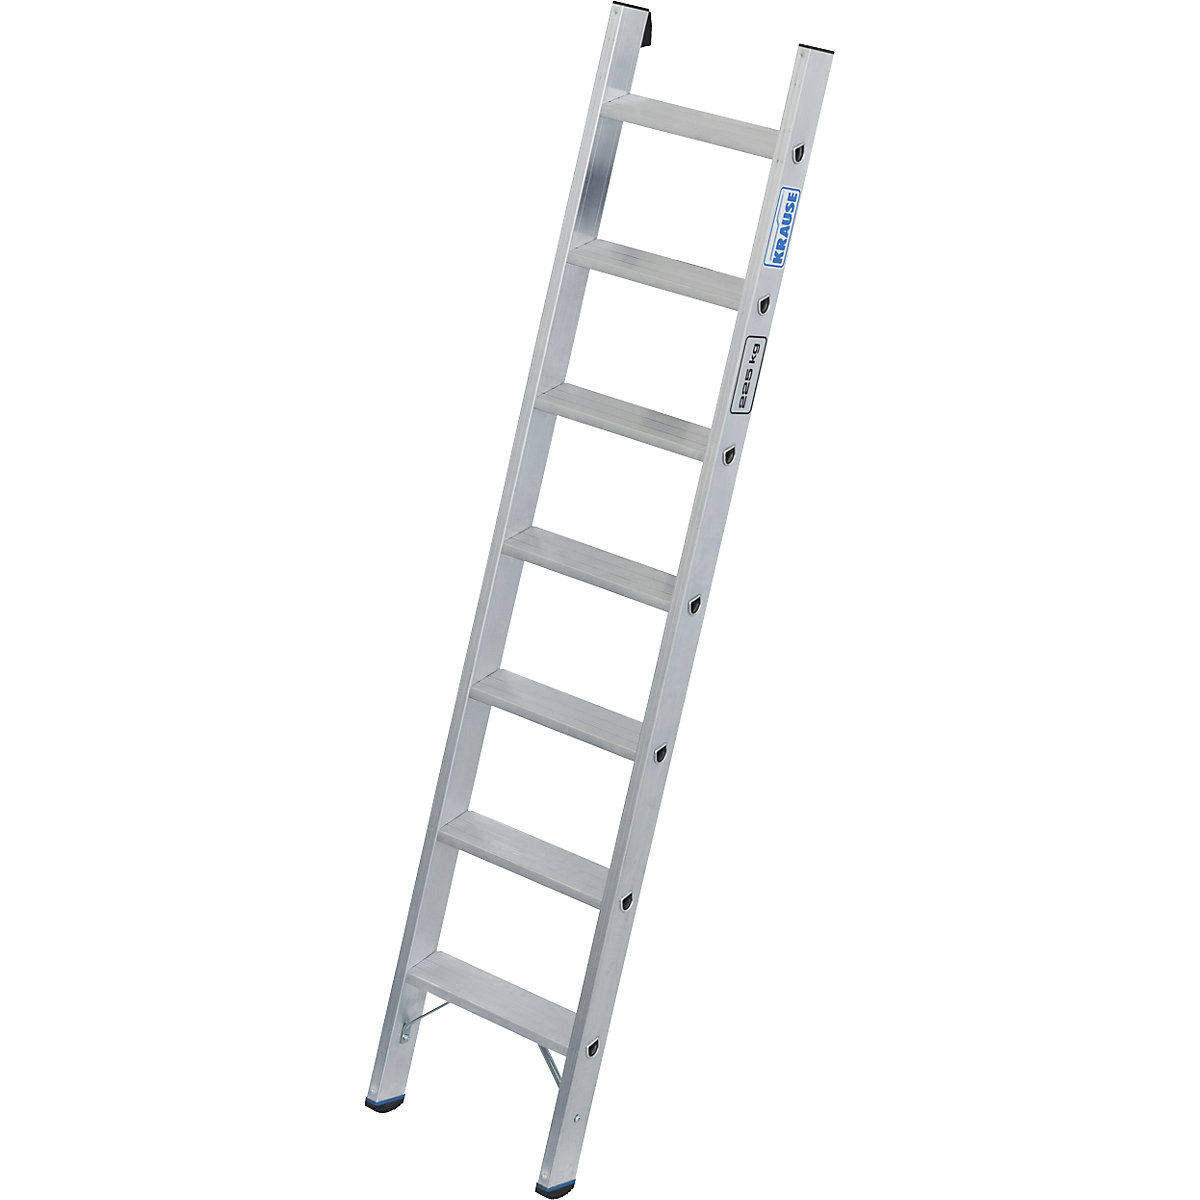 Heavy duty lean to ladder – KRAUSE, 80 mm aluminium steps, up to 225 kg, 7 steps-2